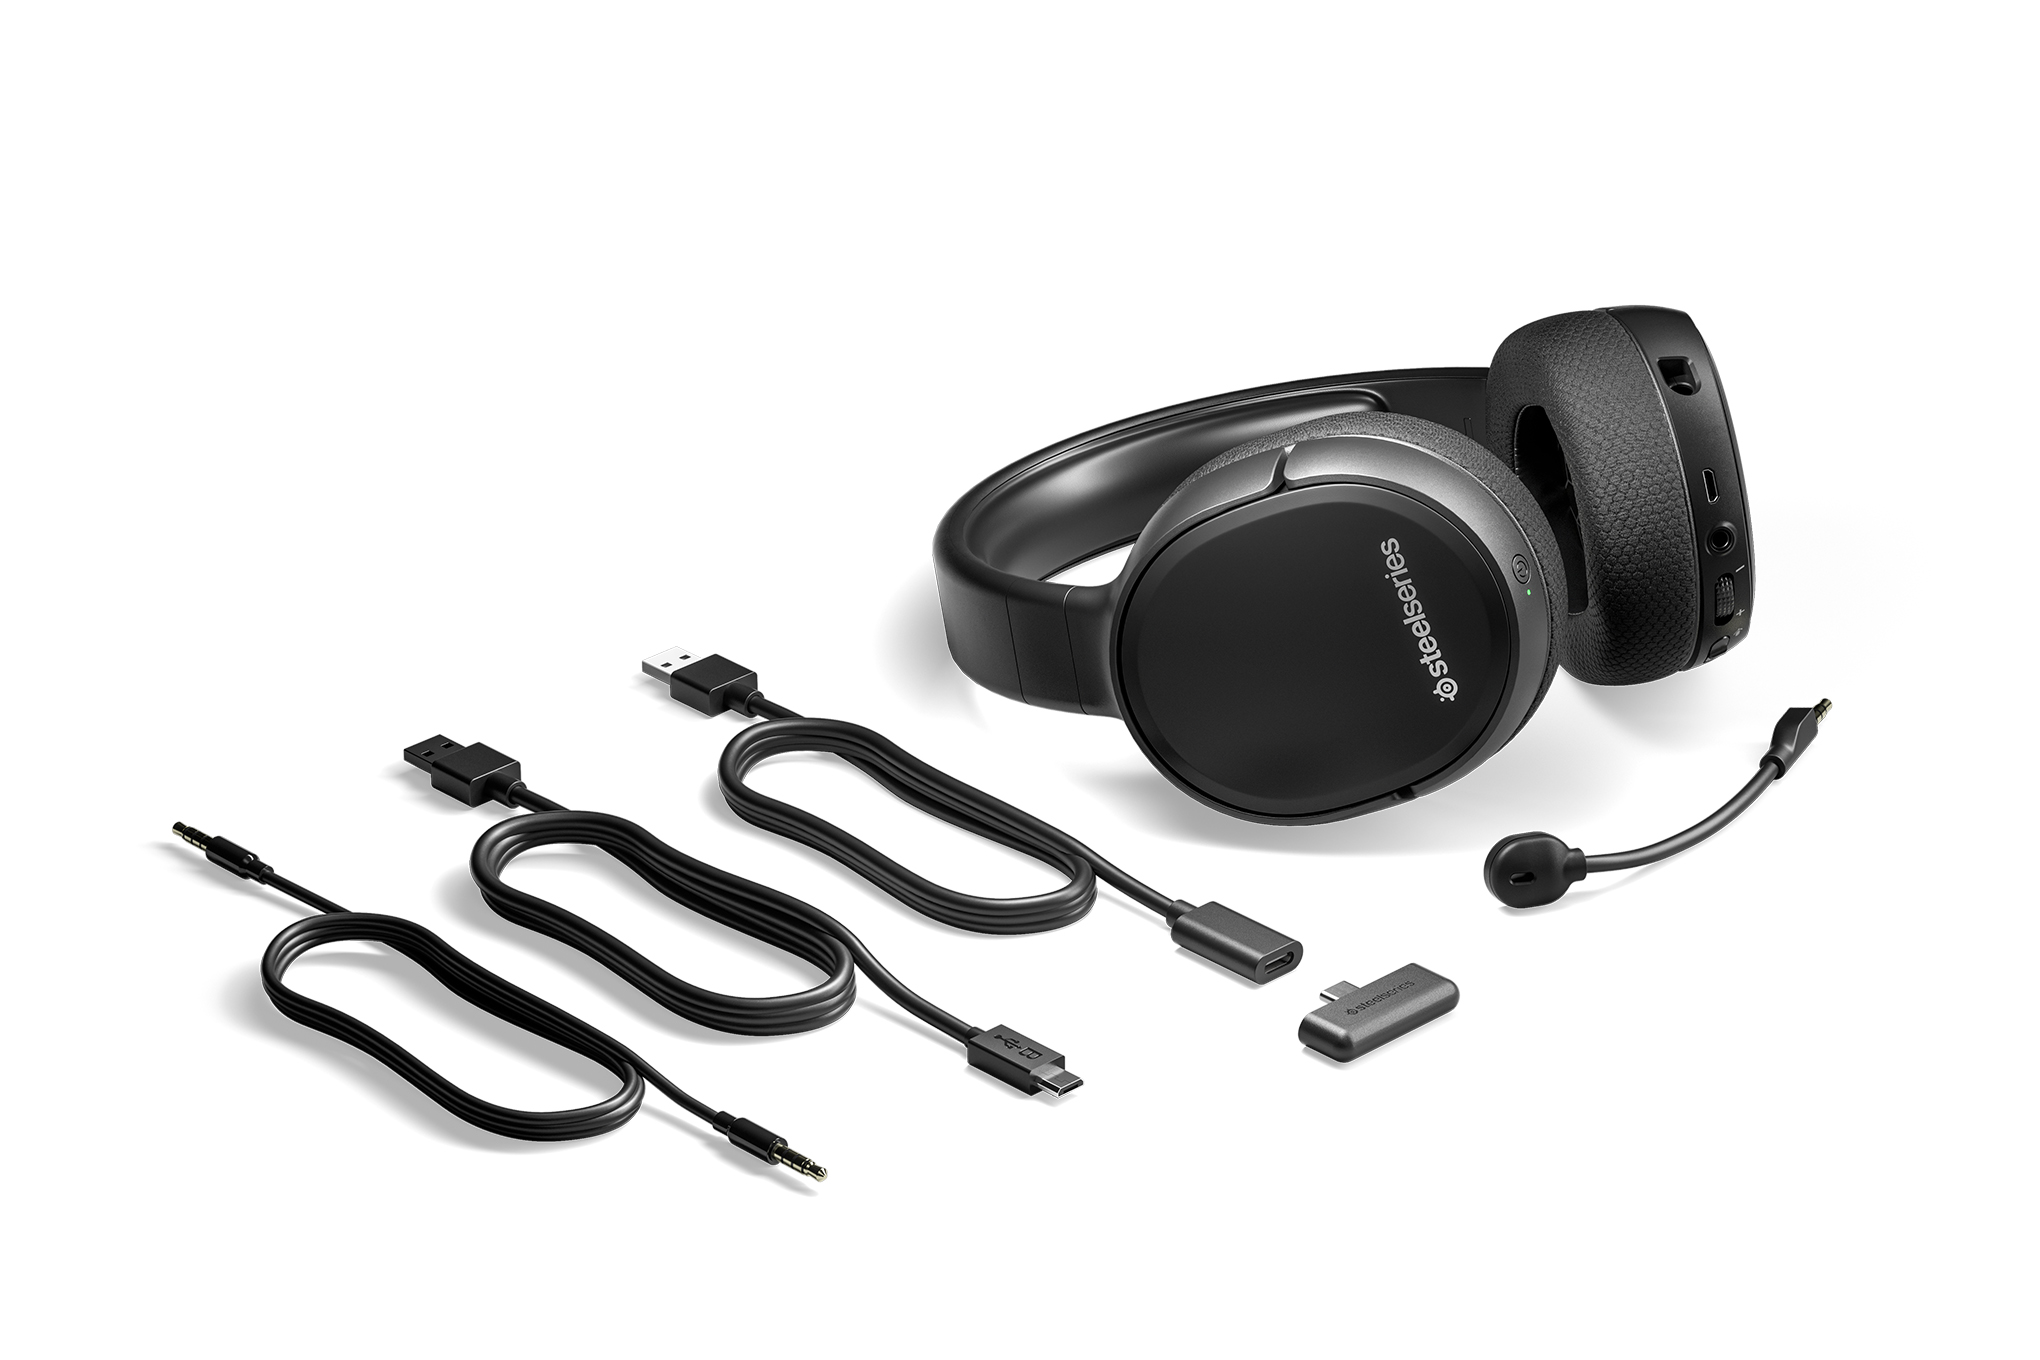 The SteelSeries Arctis 1 Wireless with its various accessories splayed out around it.